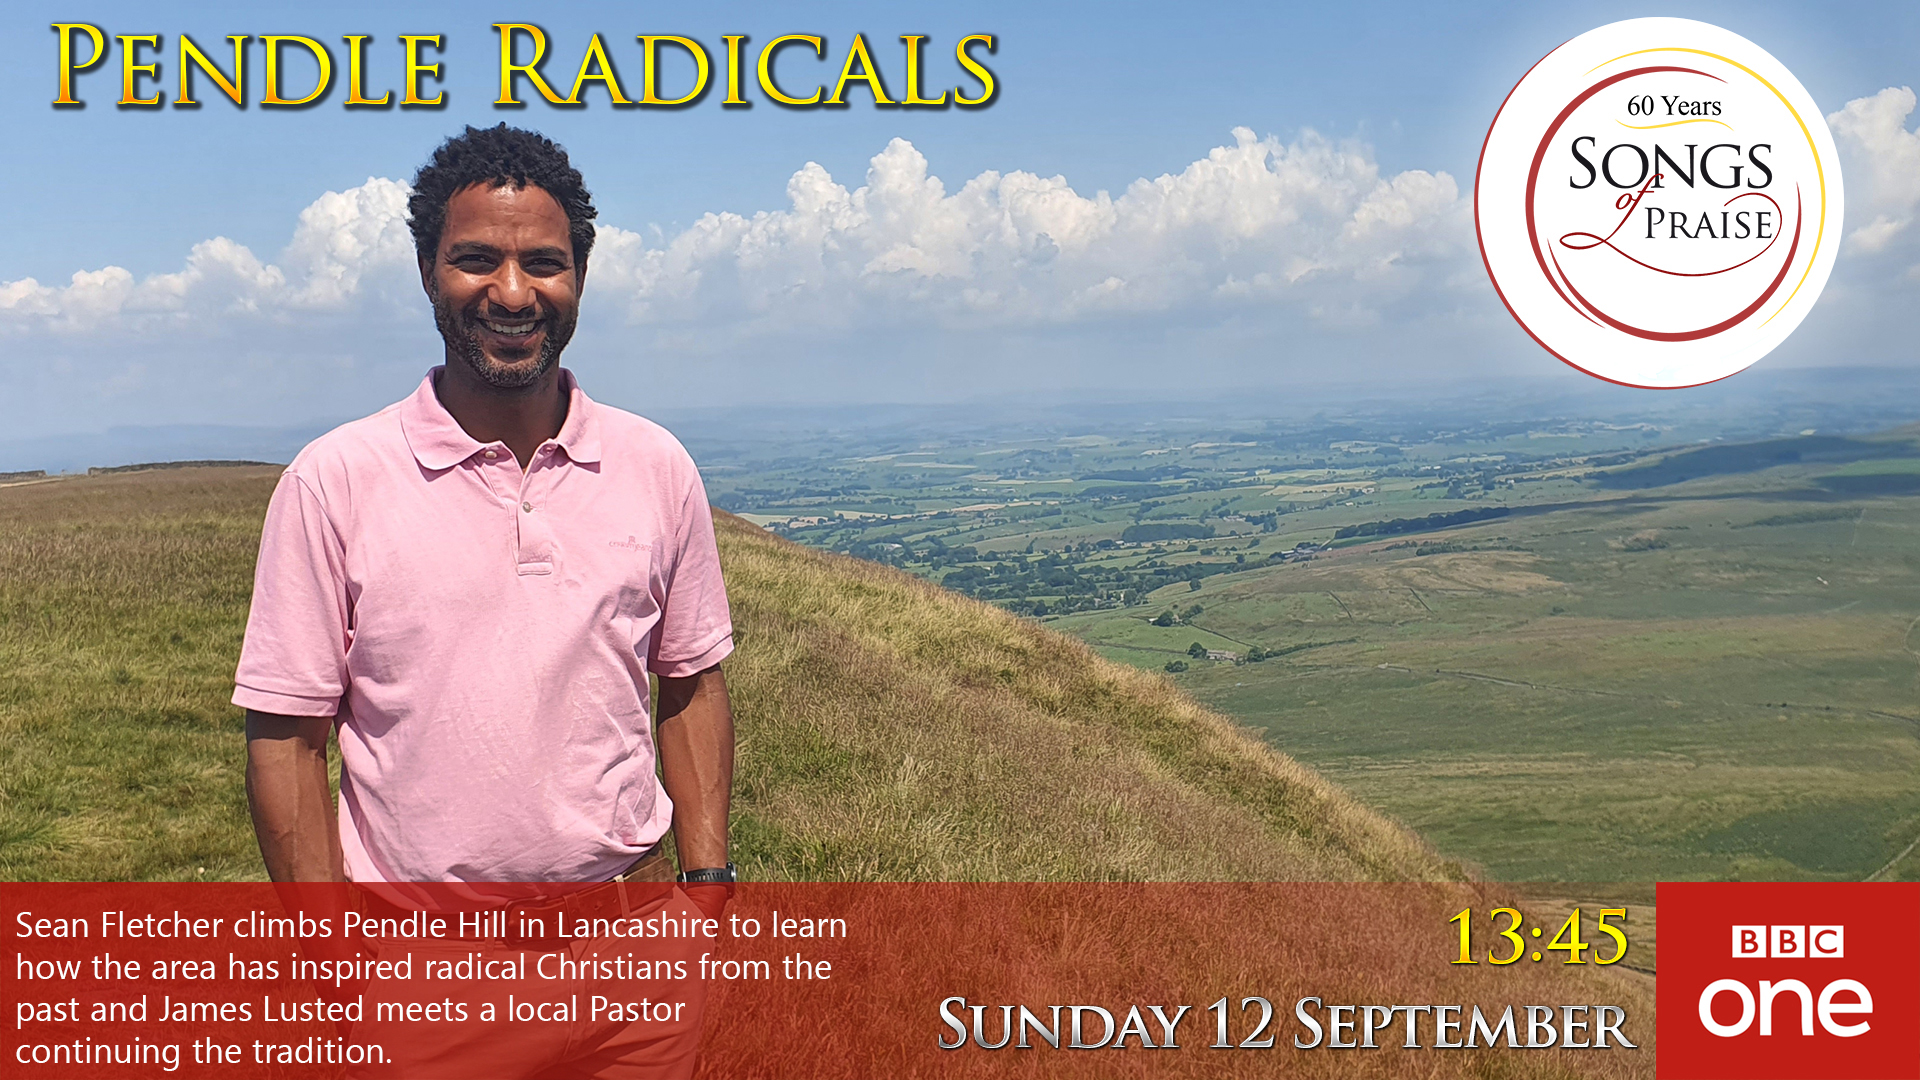 pendle radicals and songs of praise